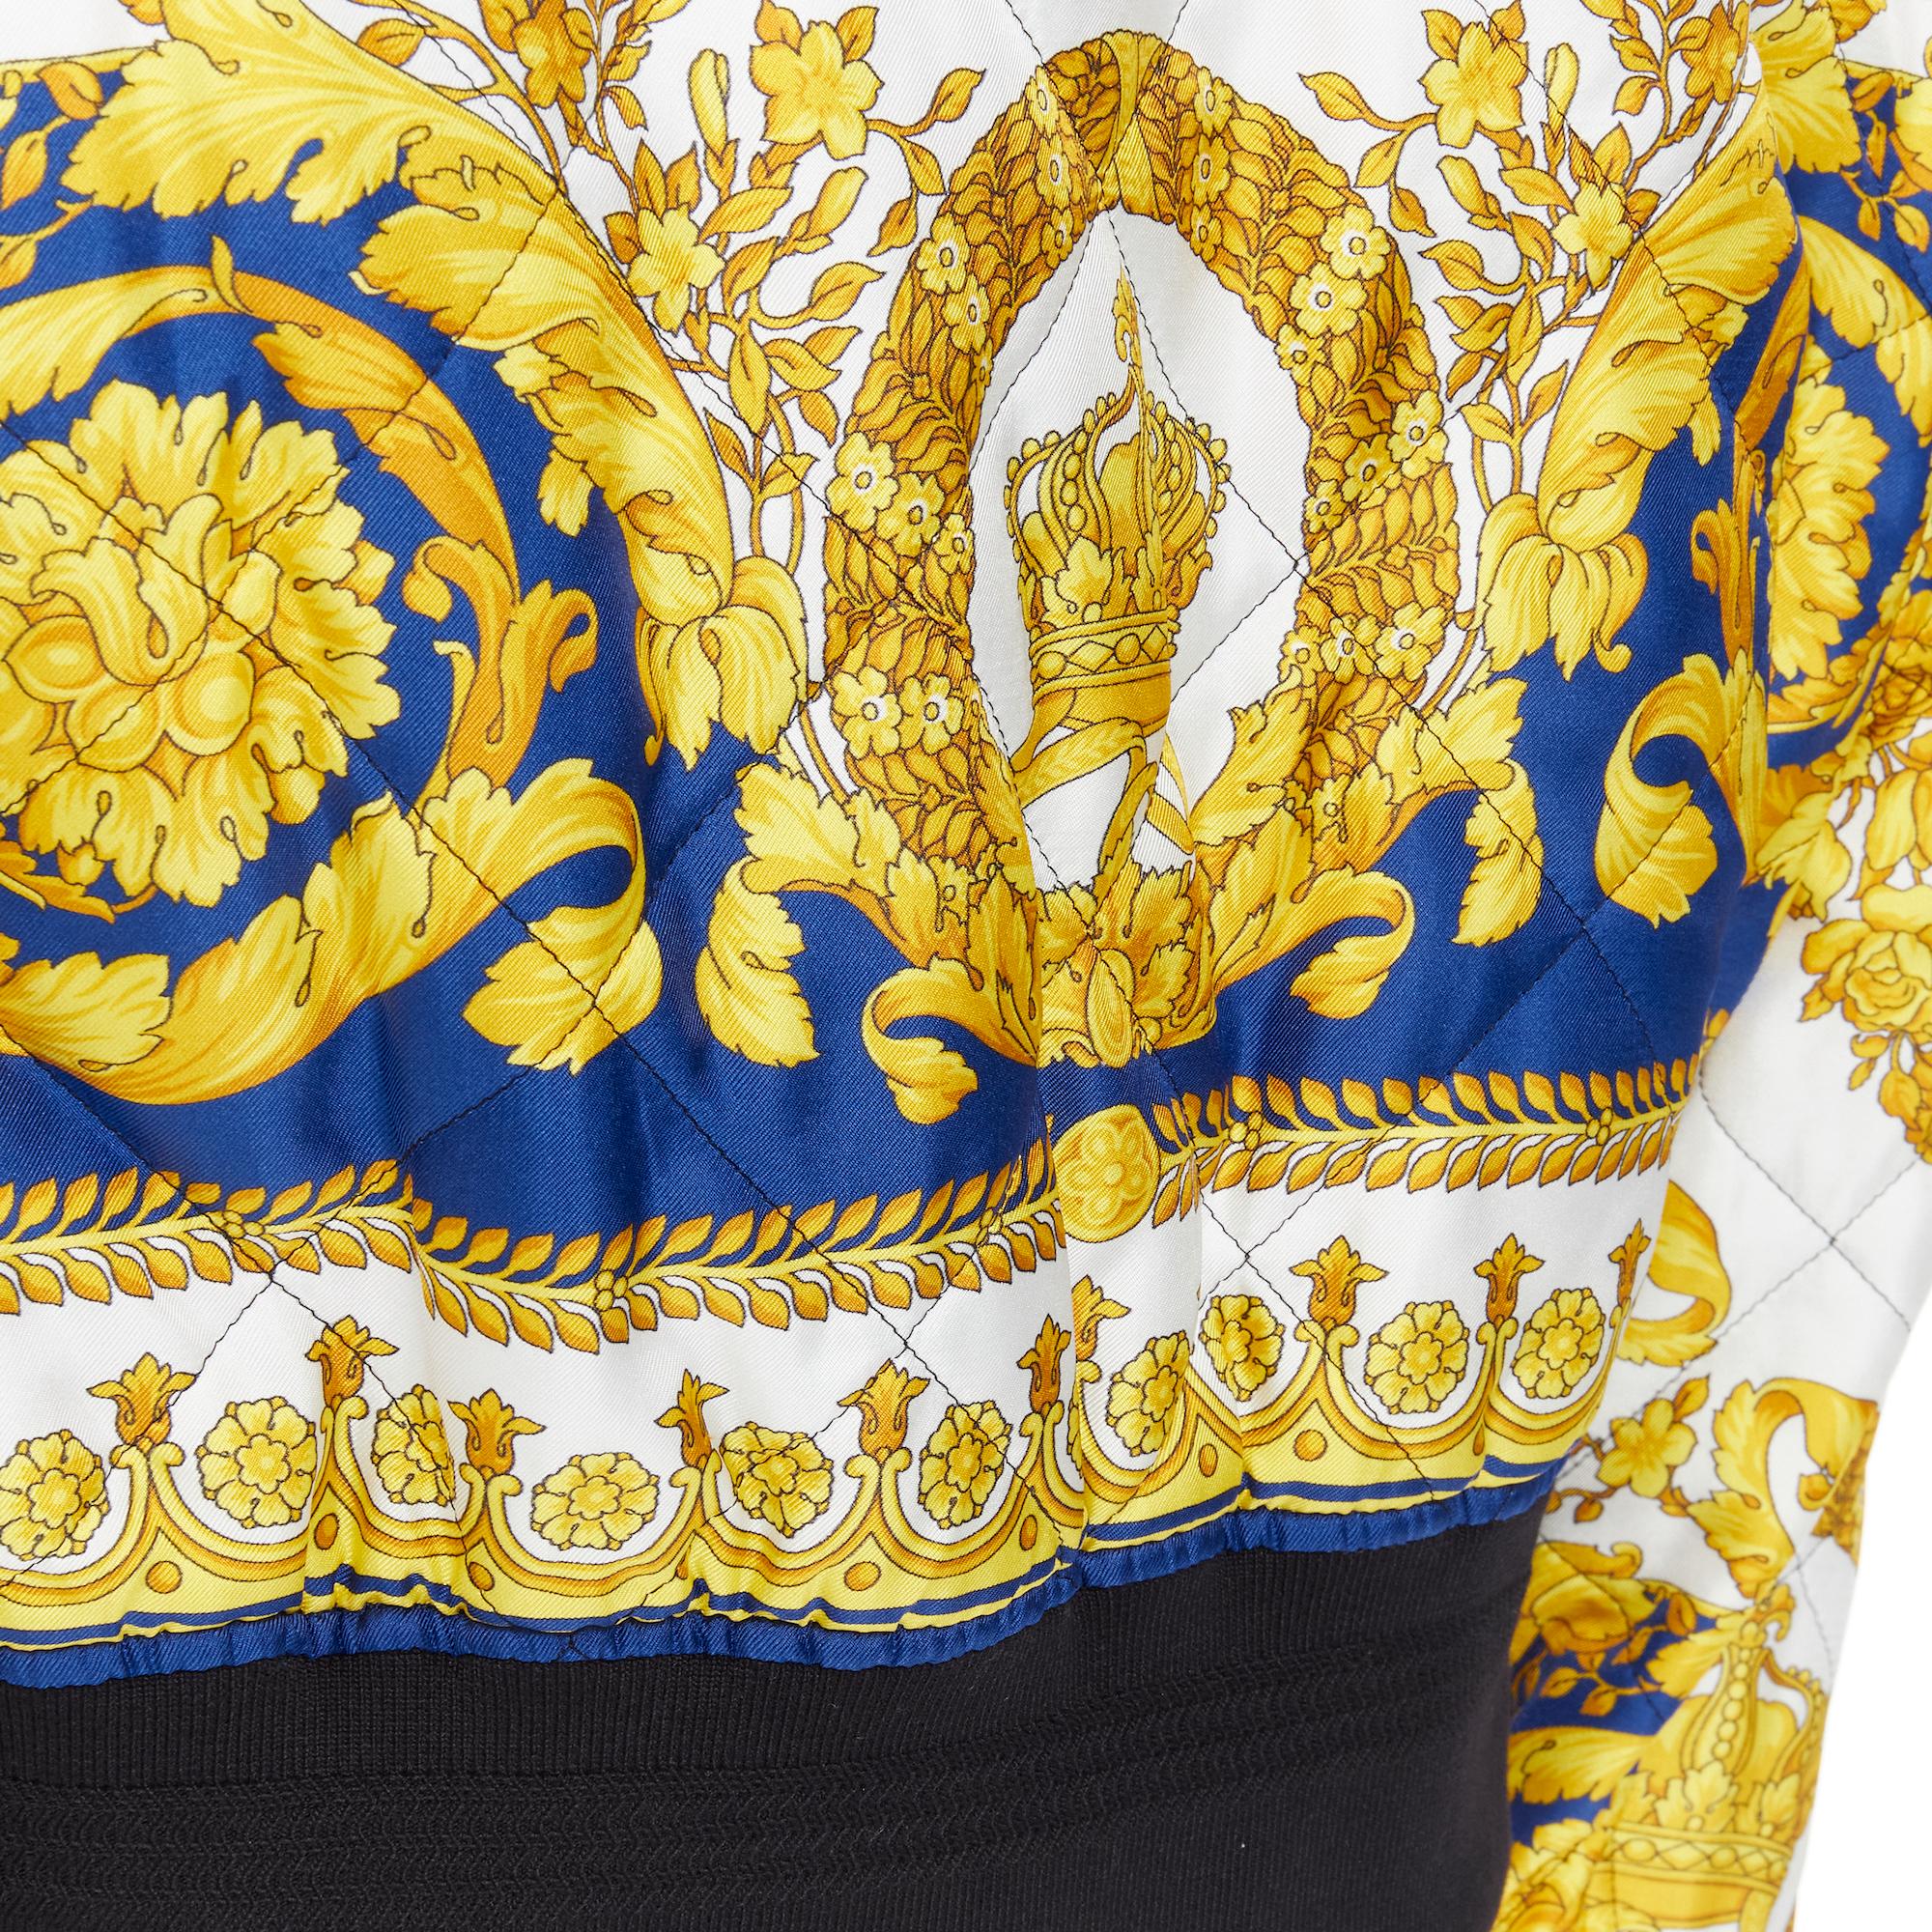 new VERSACE royal blue gold Medusa Barocco diamond quilted bomber jacket IT52 XL 3